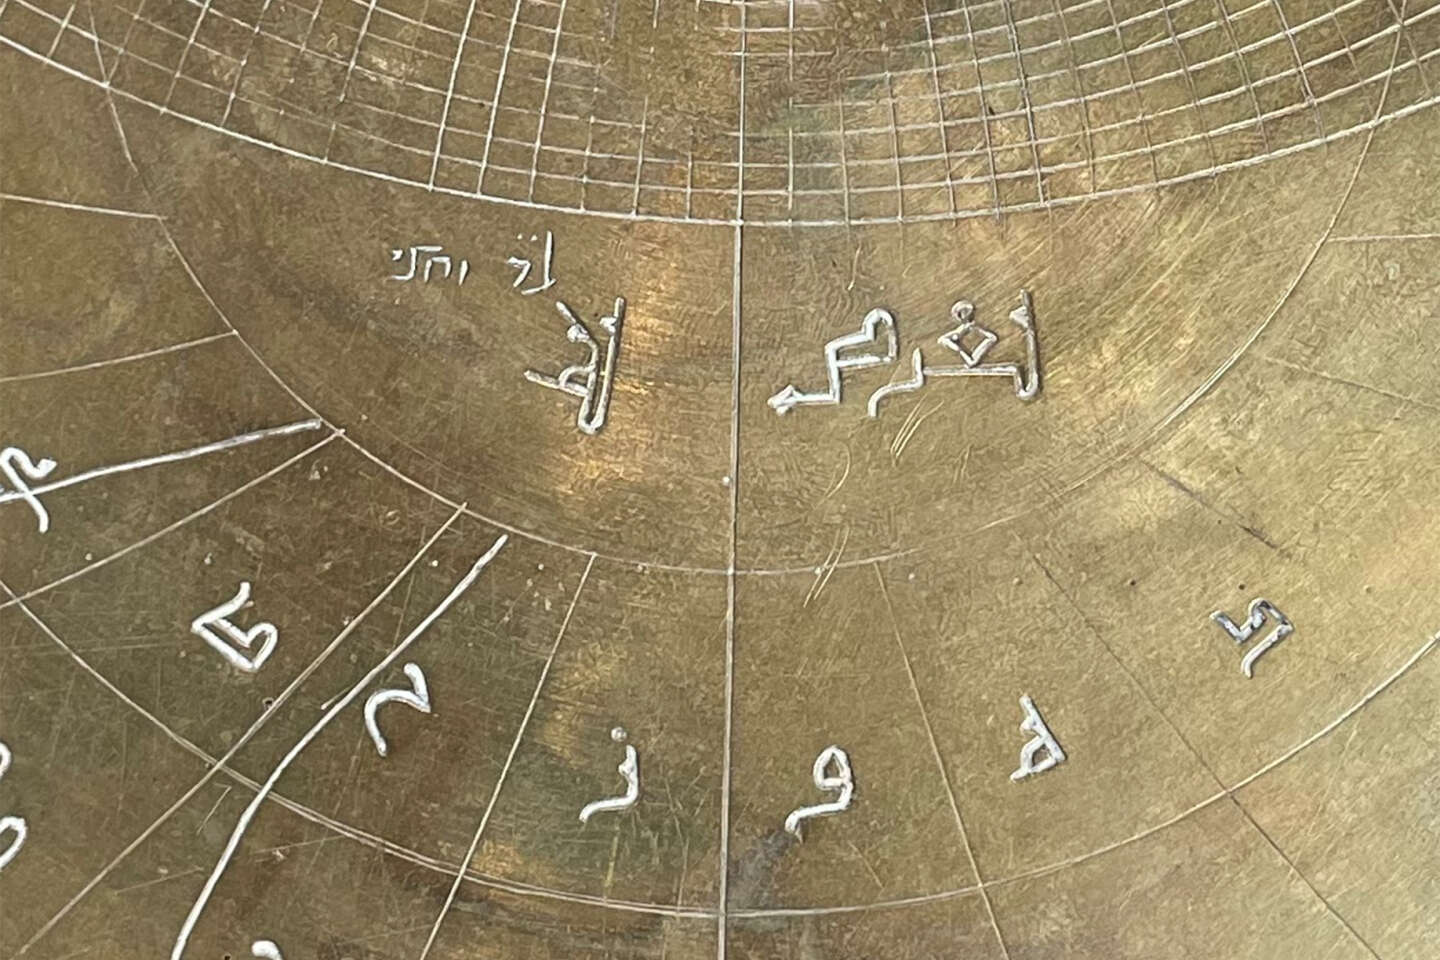 A curious medieval astrolabe engraved with inscriptions in Arabic and Hebrew